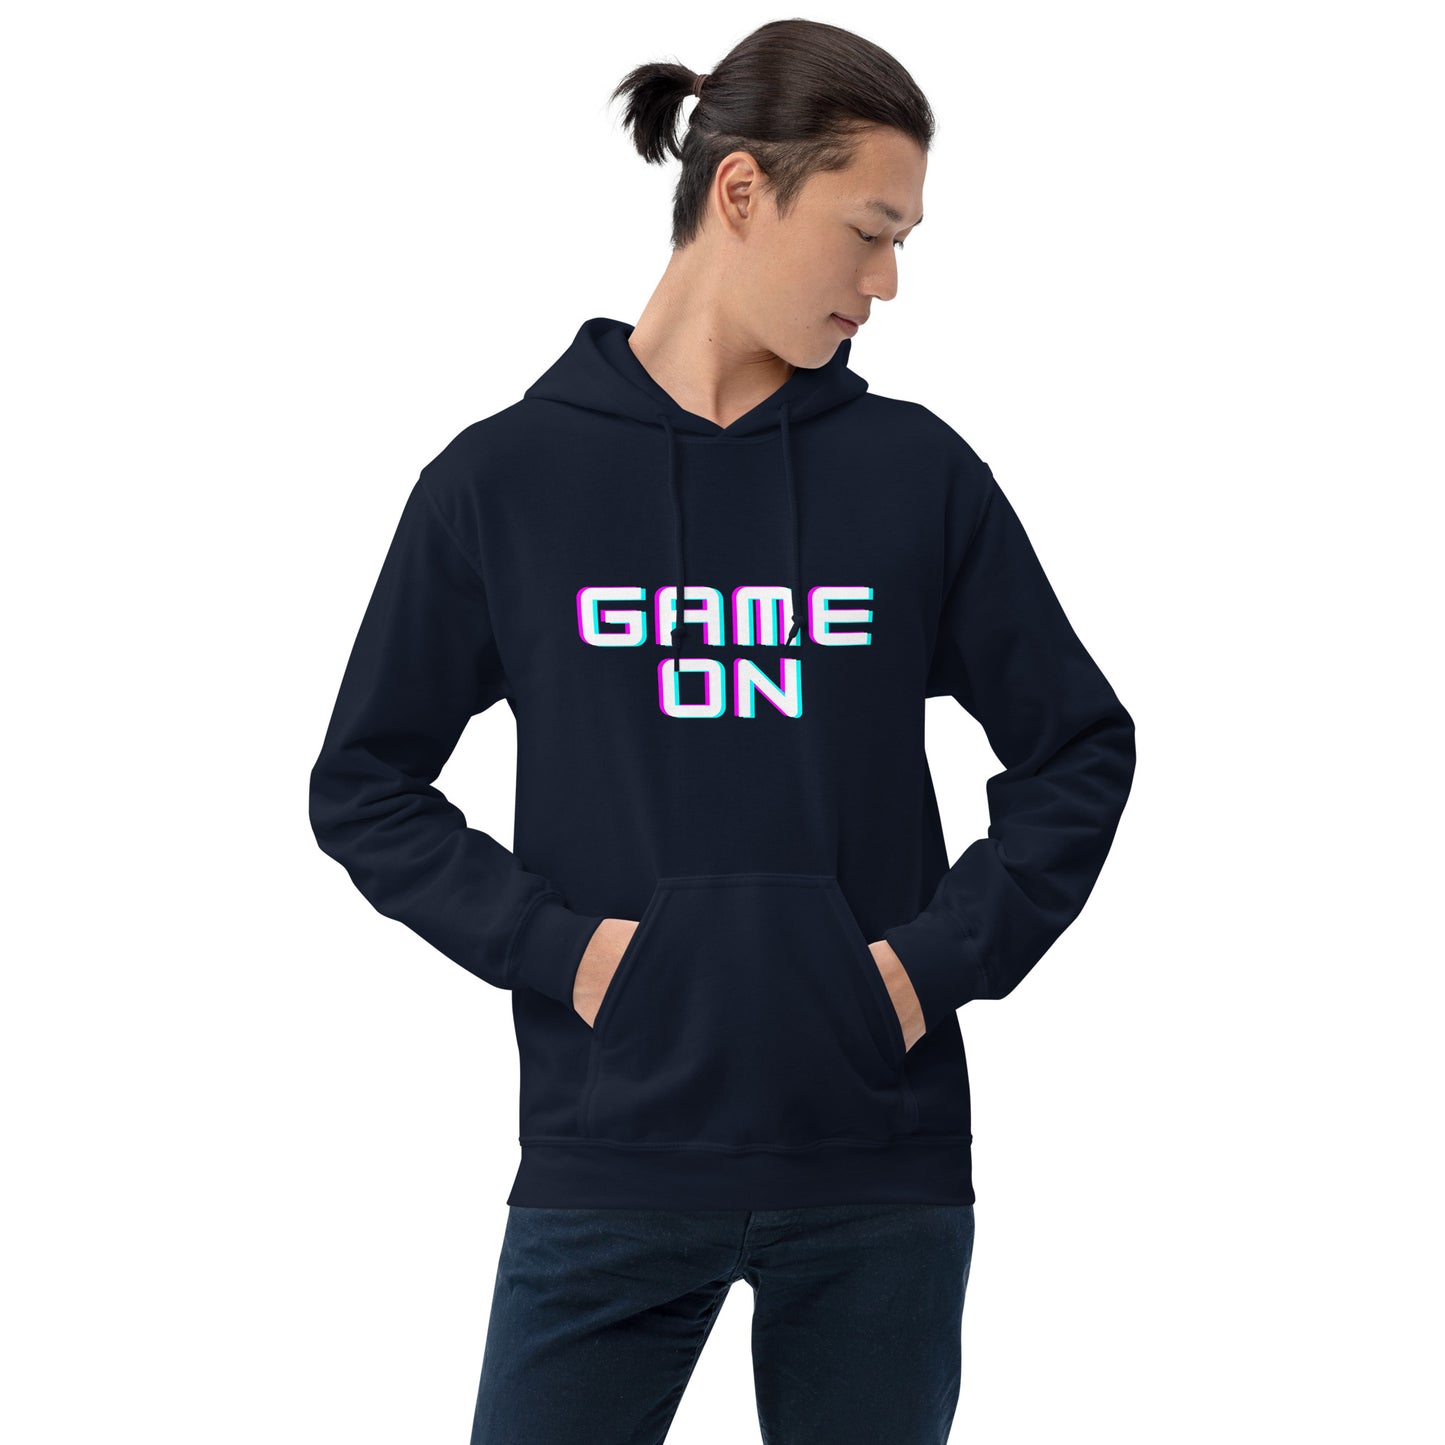 Unisex Hoodie | Game on - Better Outcomes